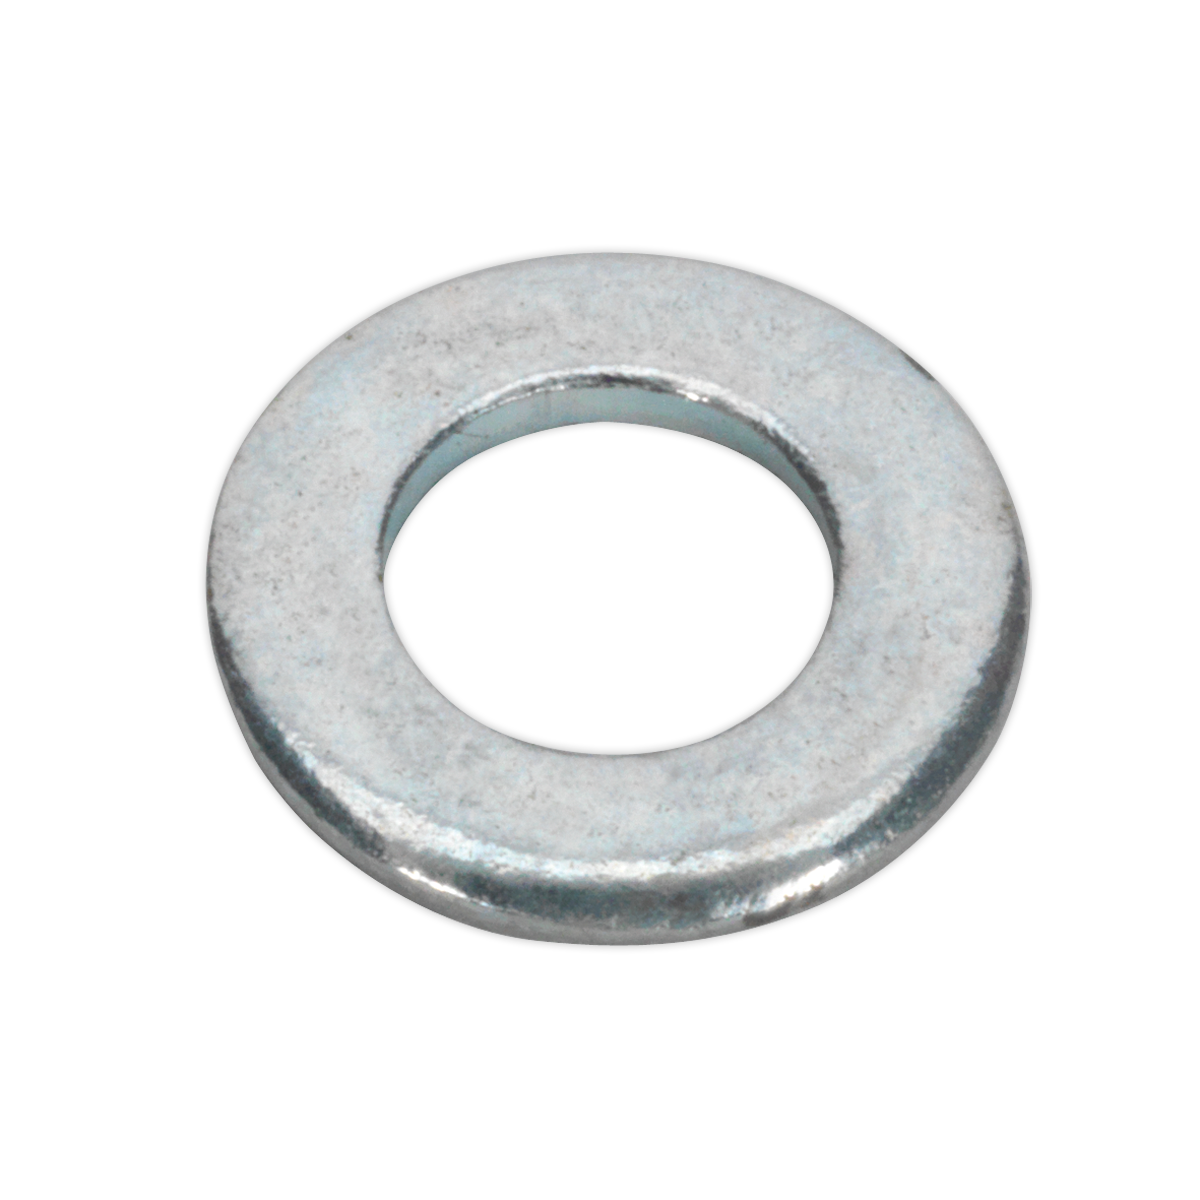 Sealey Flat Washer DIN 125 - M4 x 9mm Form A Zinc Pack of 100